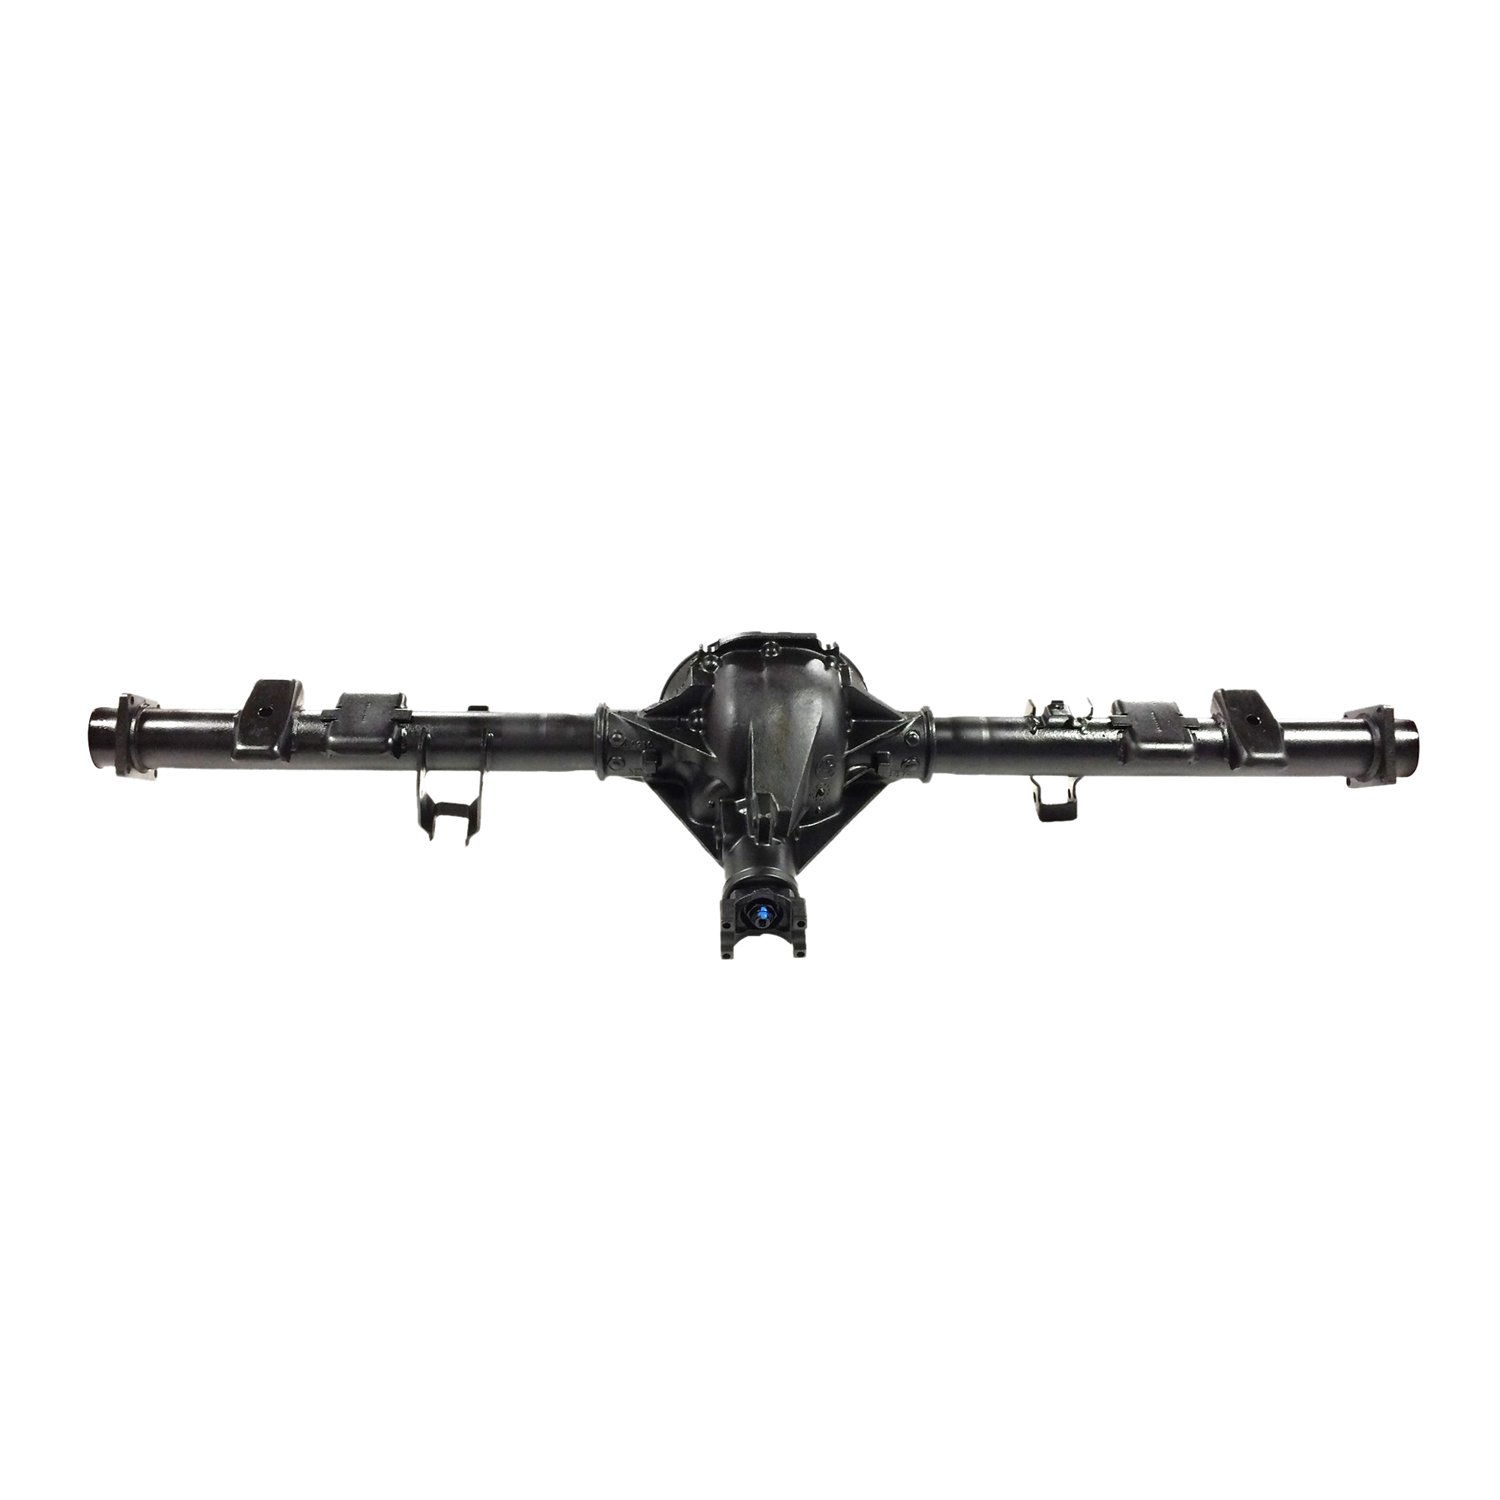 Remanufactured Axle Assembly for GM 8.5" 1988-95 GM Van 1500 & 2500, 3.42 Ratio, Posi